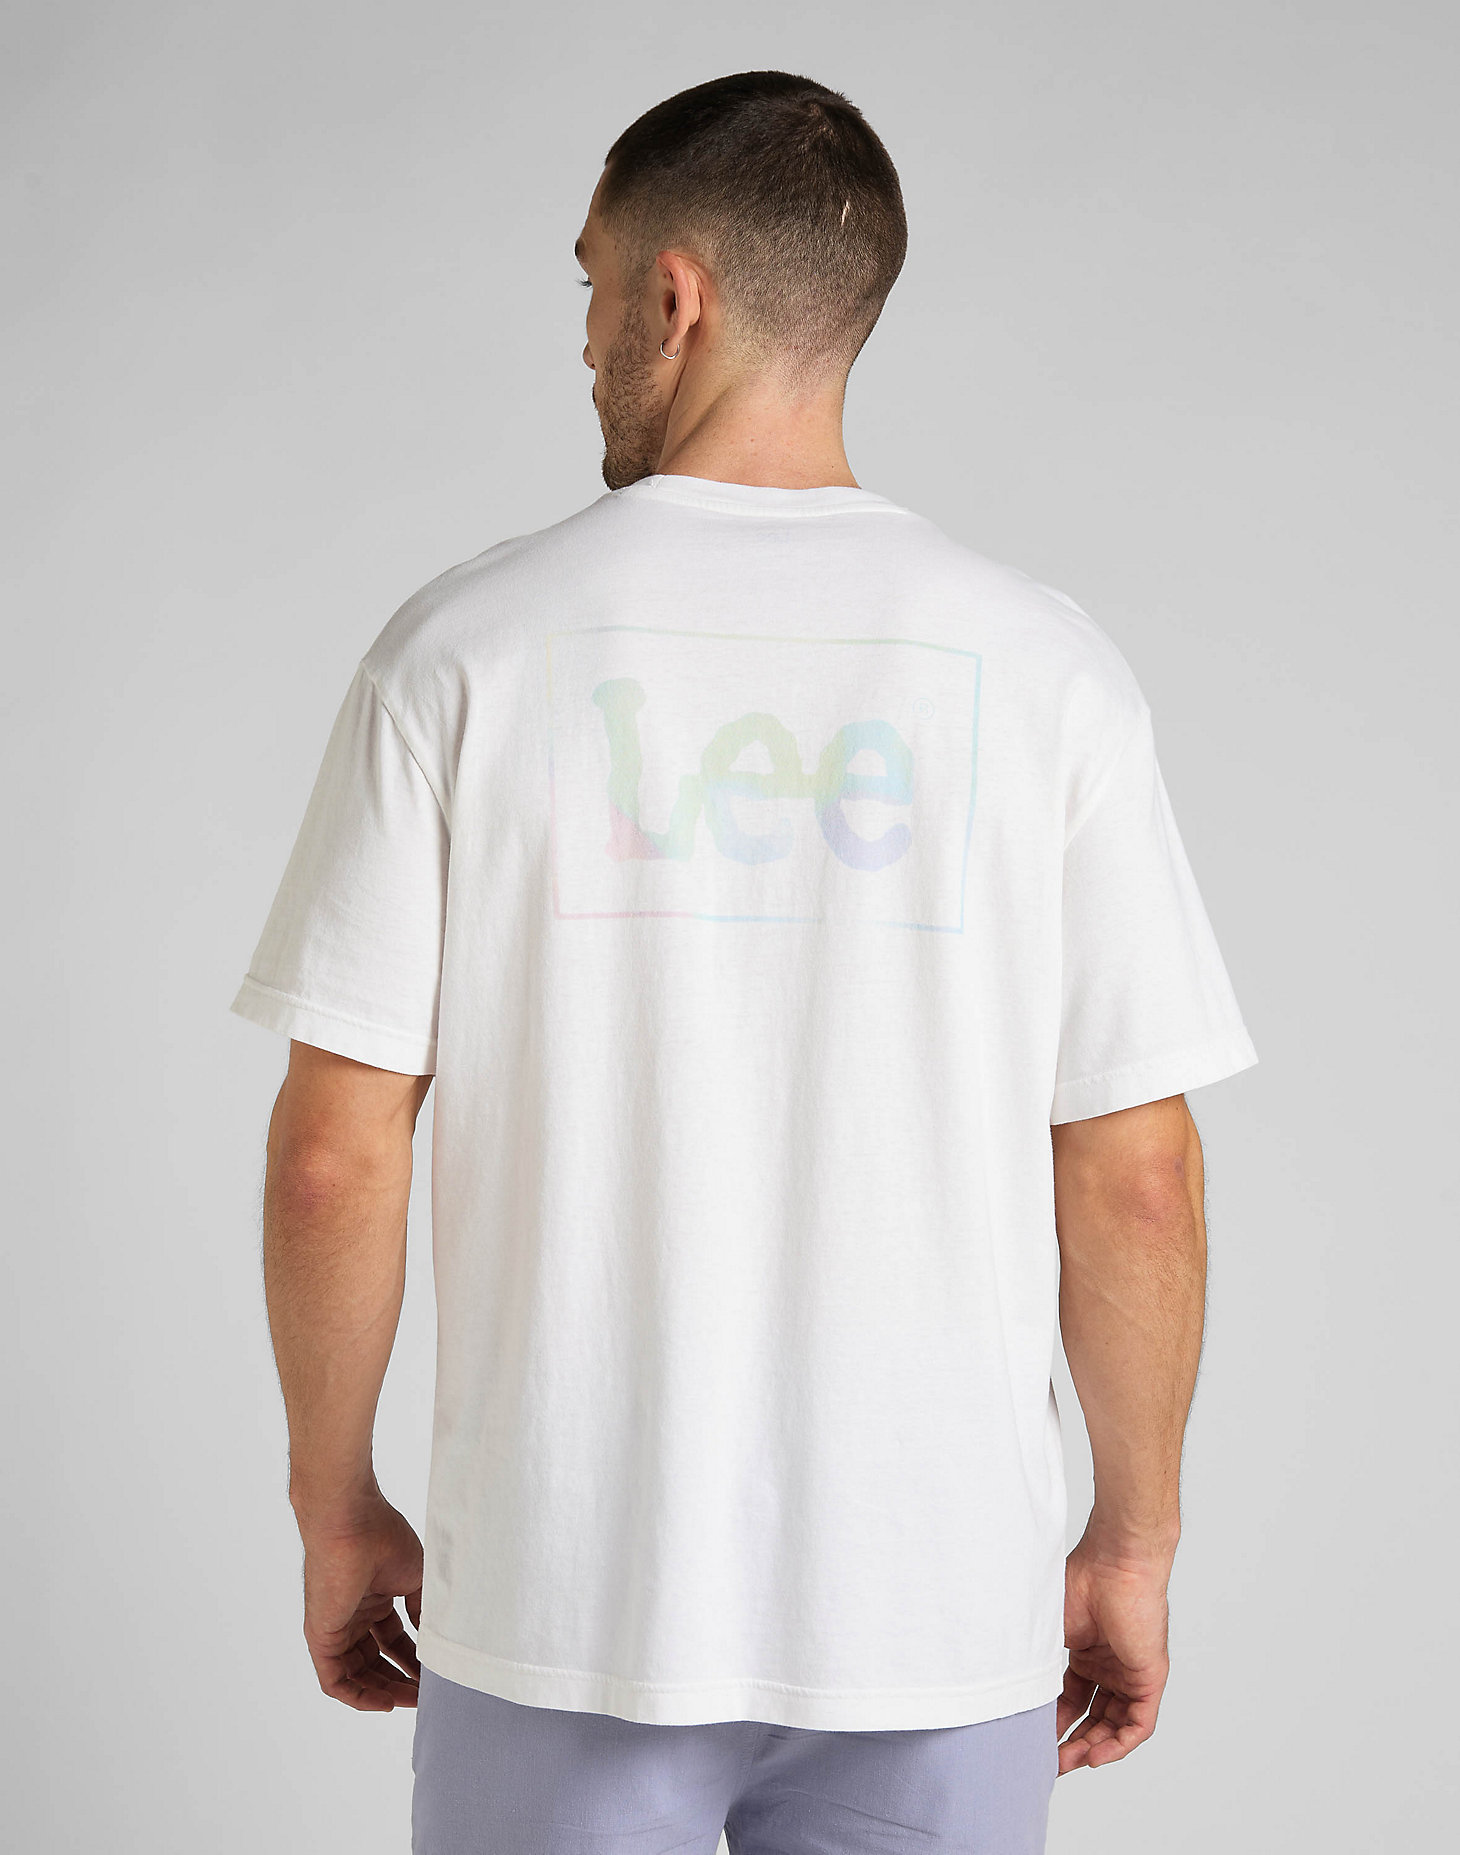 Logo Loose Tee in Bright White alternative view 1